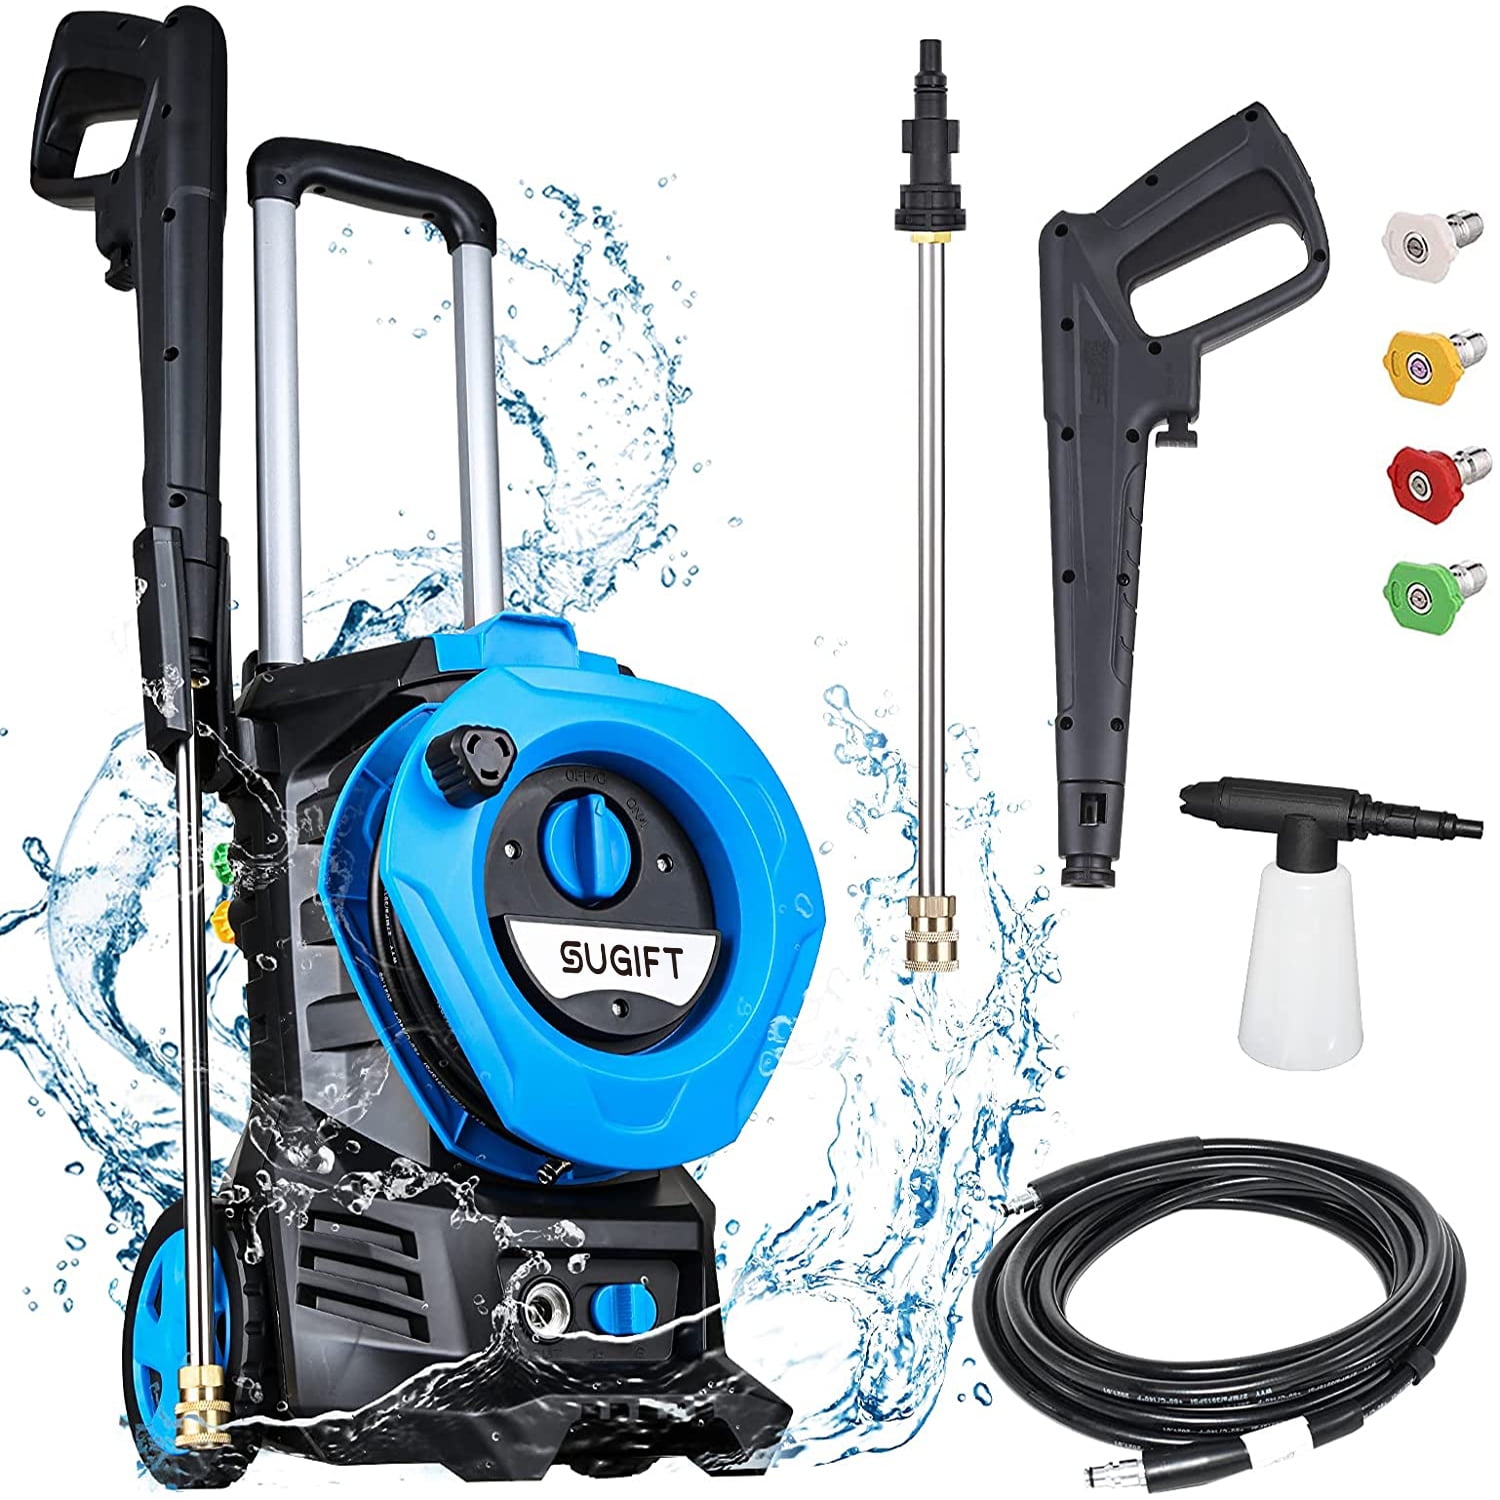 Electric Pressure Washer,2000 PSI,Max.1.76 GPM Power Washer w/ 30 ft Hose